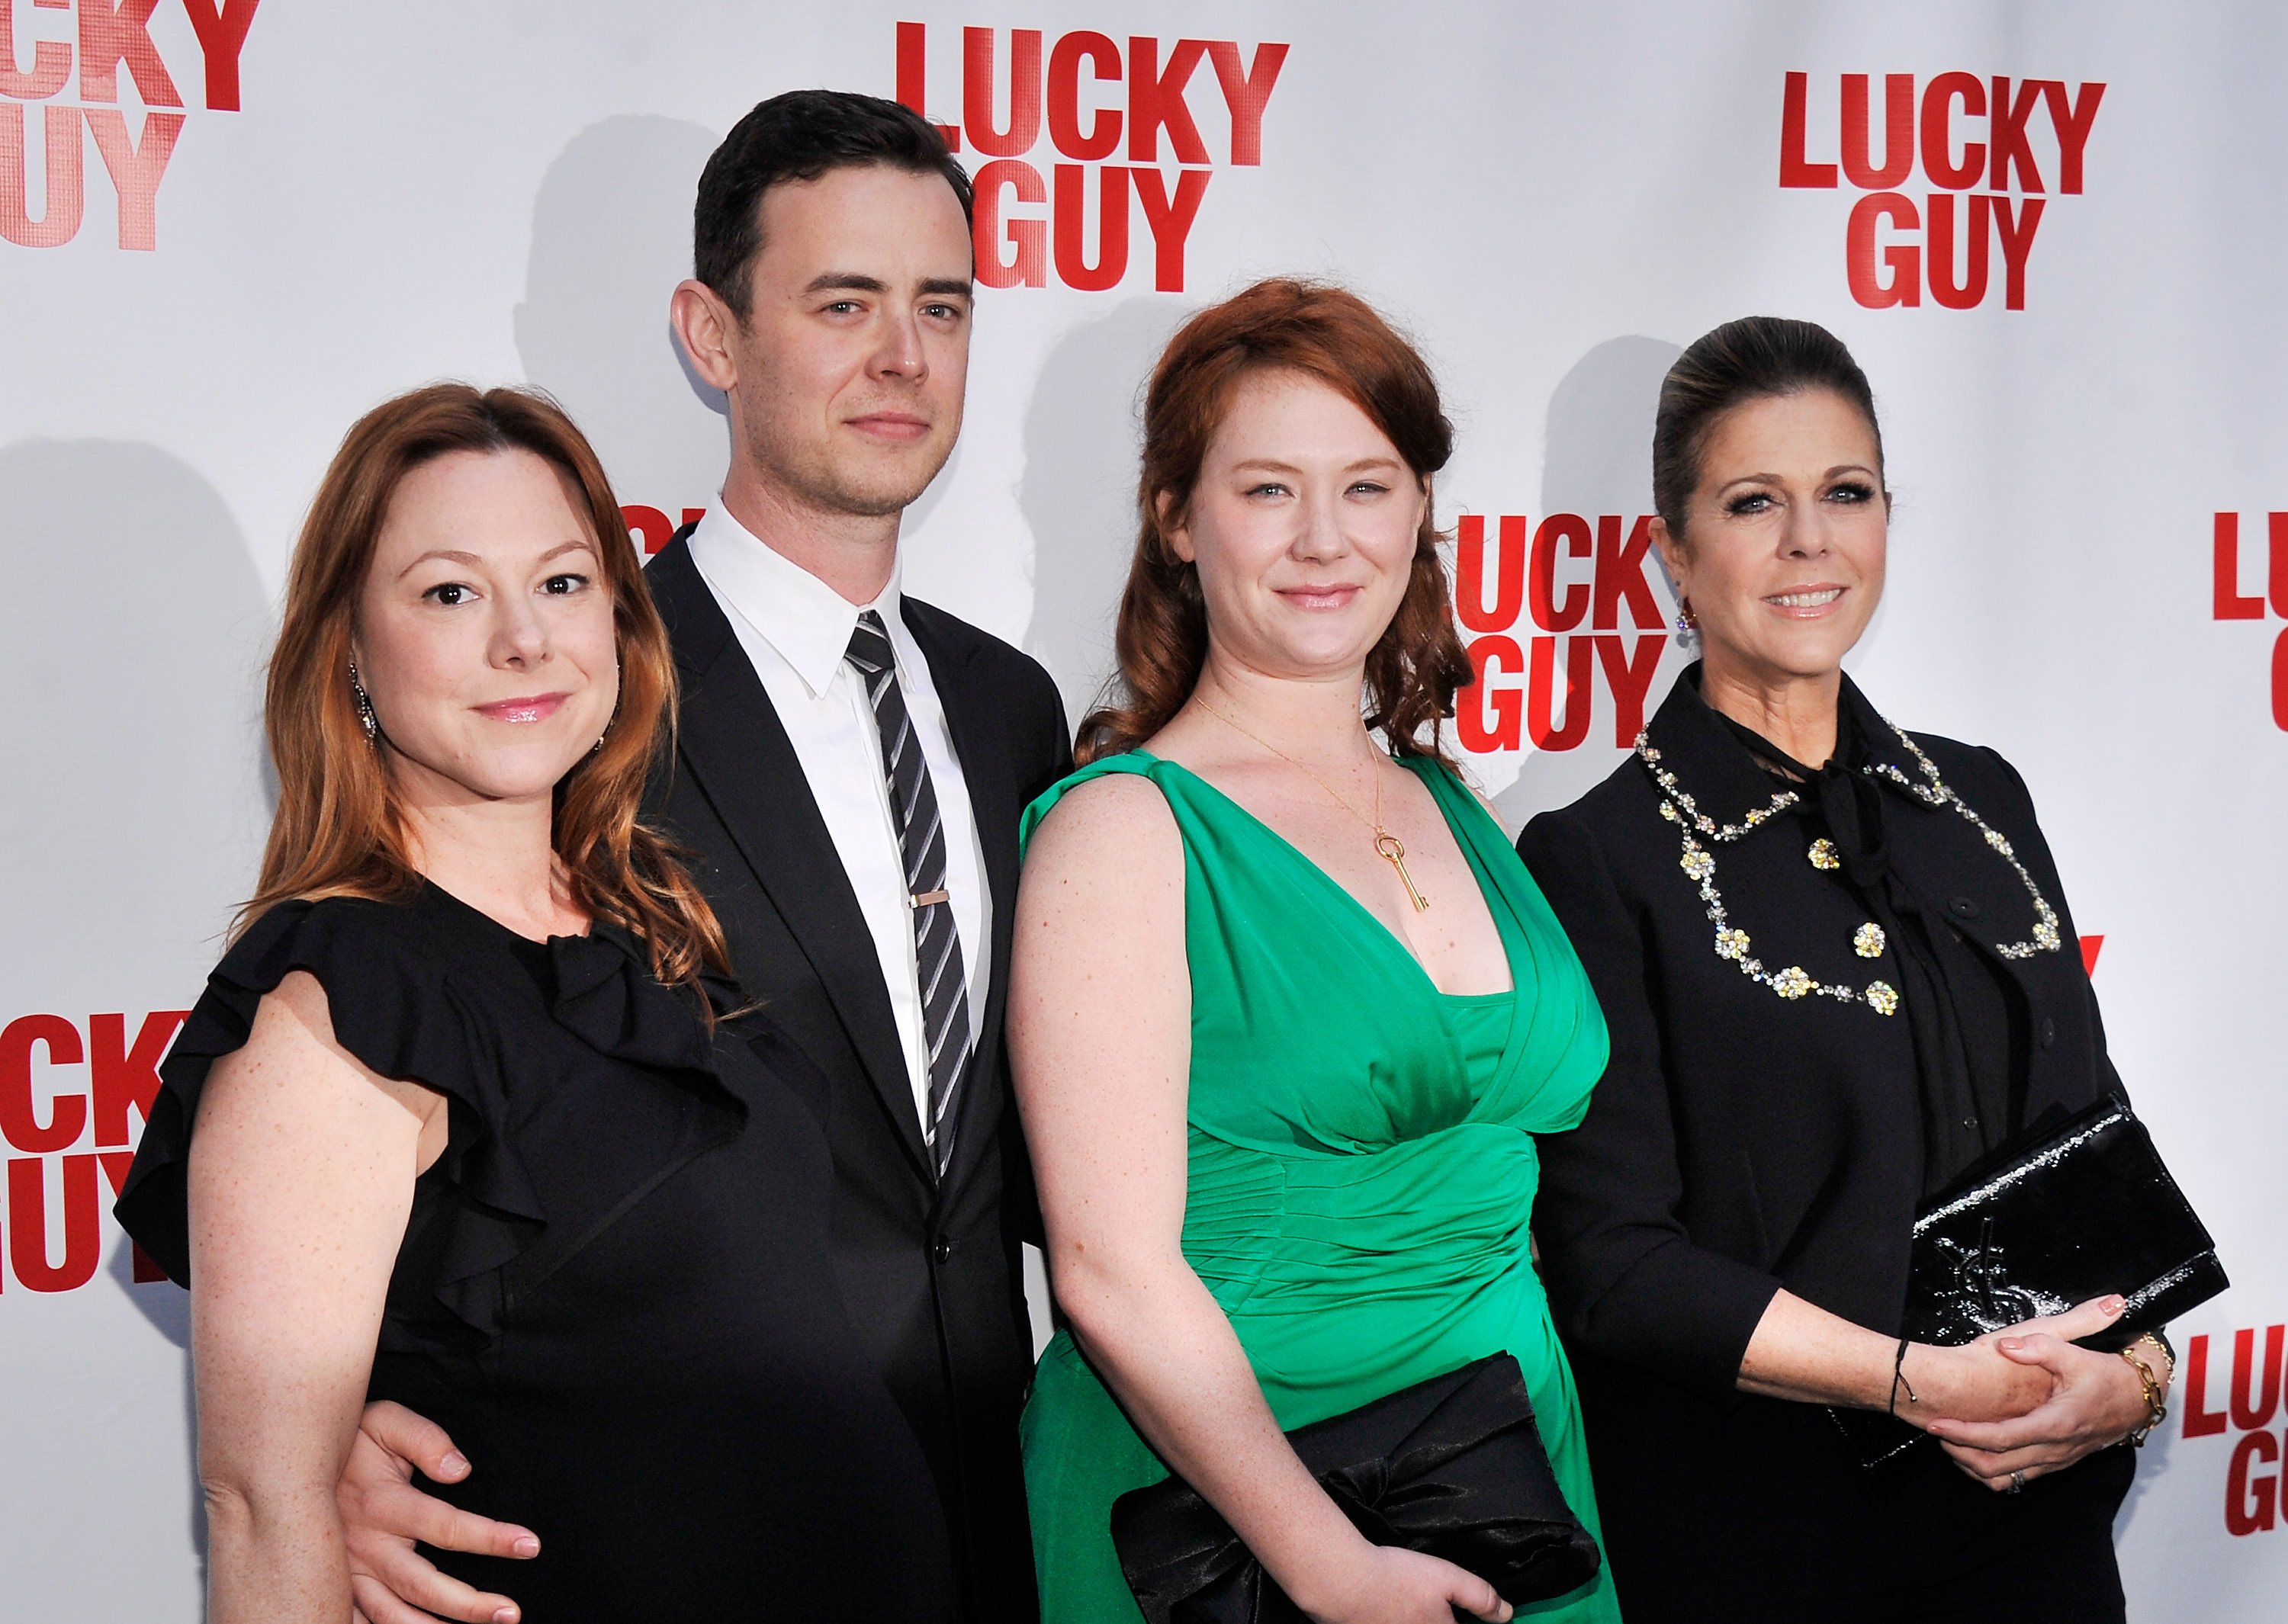 Samantha Bryant, Colin Hanks, Elizabeth Hanks, and actress Rita Wilson attend the "Lucky Guy" Broadway Opening Night on April 1, 2013, in New York City. | Source: Getty Images